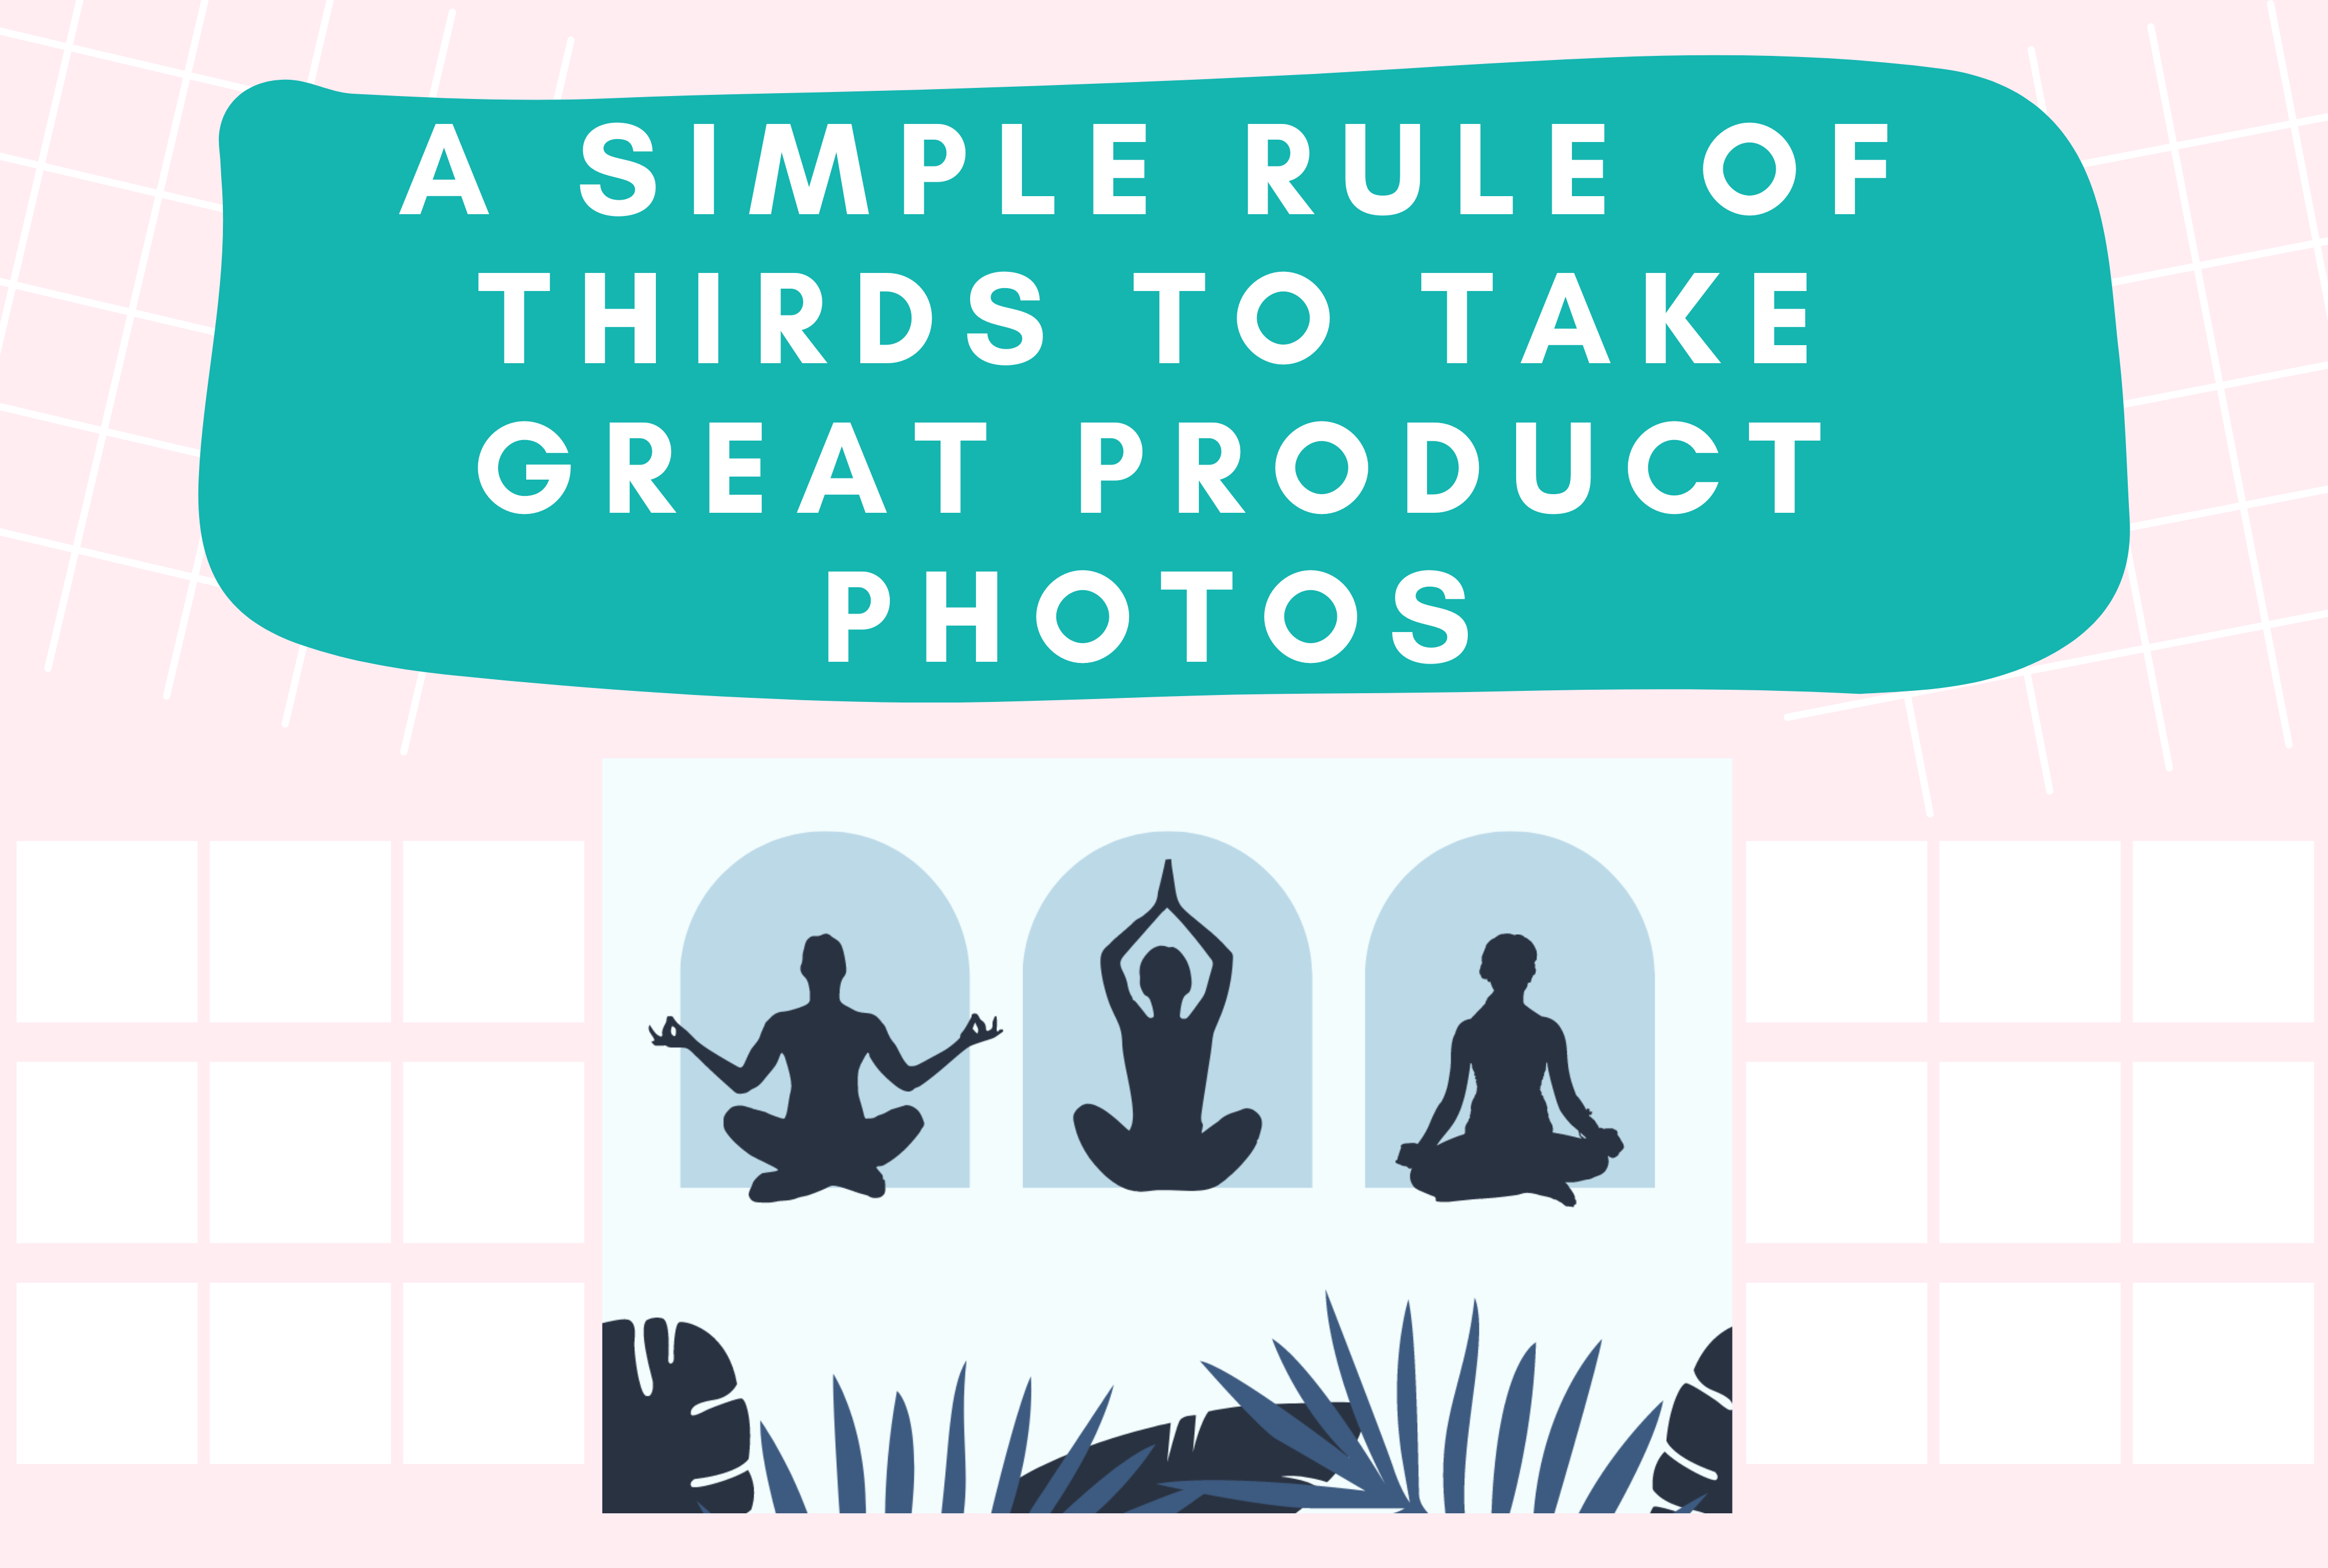 A Simple Rule Of Thirds to take great product photos